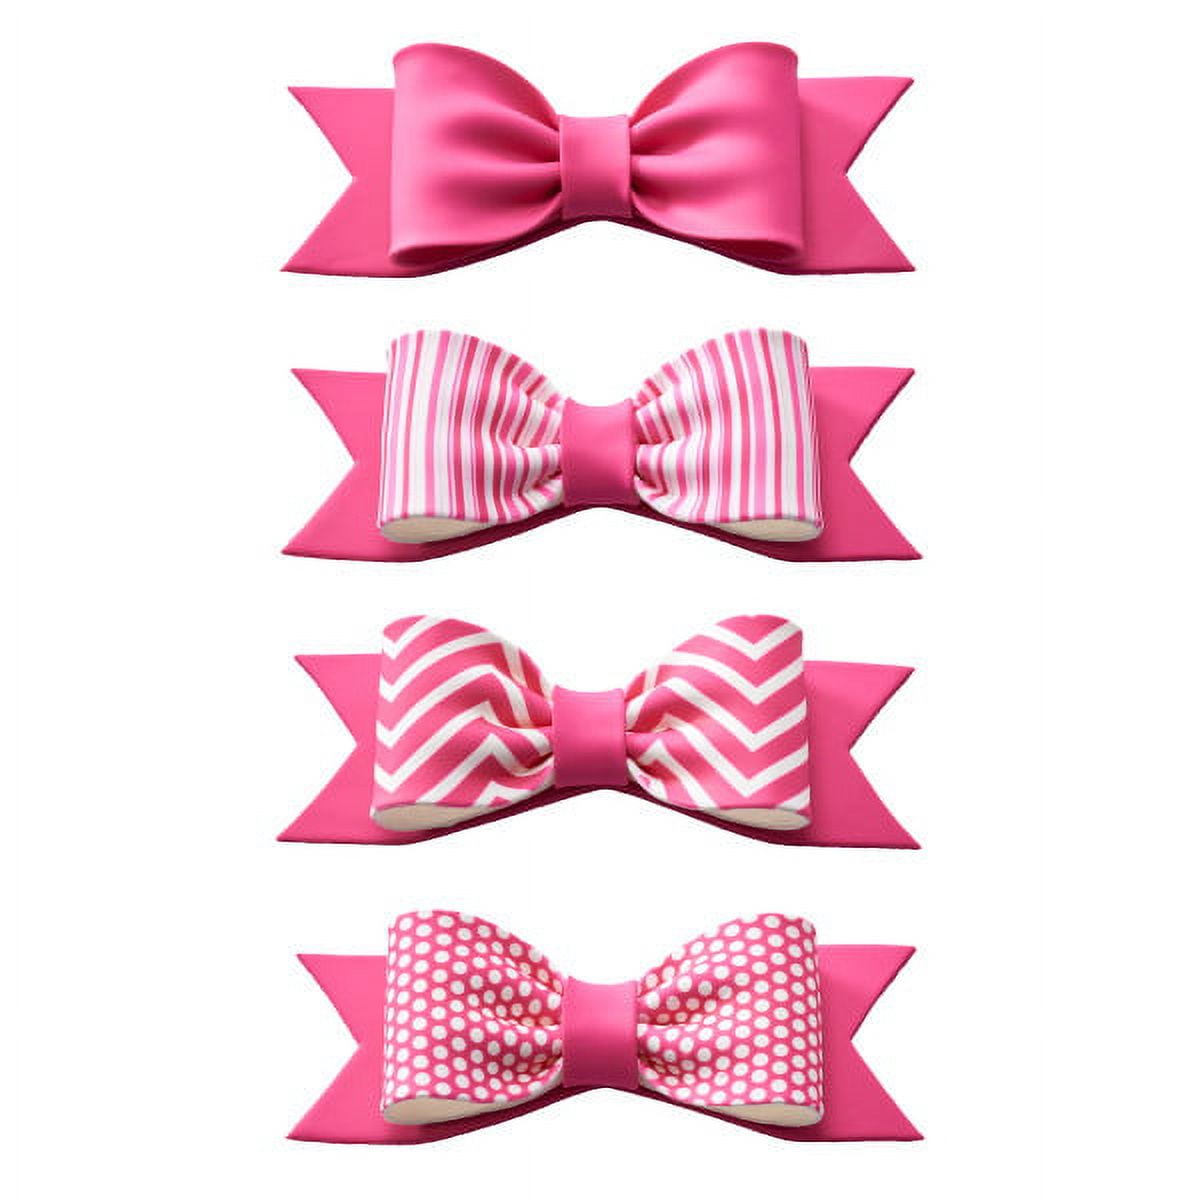 Gum Paste - Assorted Patterned Bright Pink Bows (4 pieces)